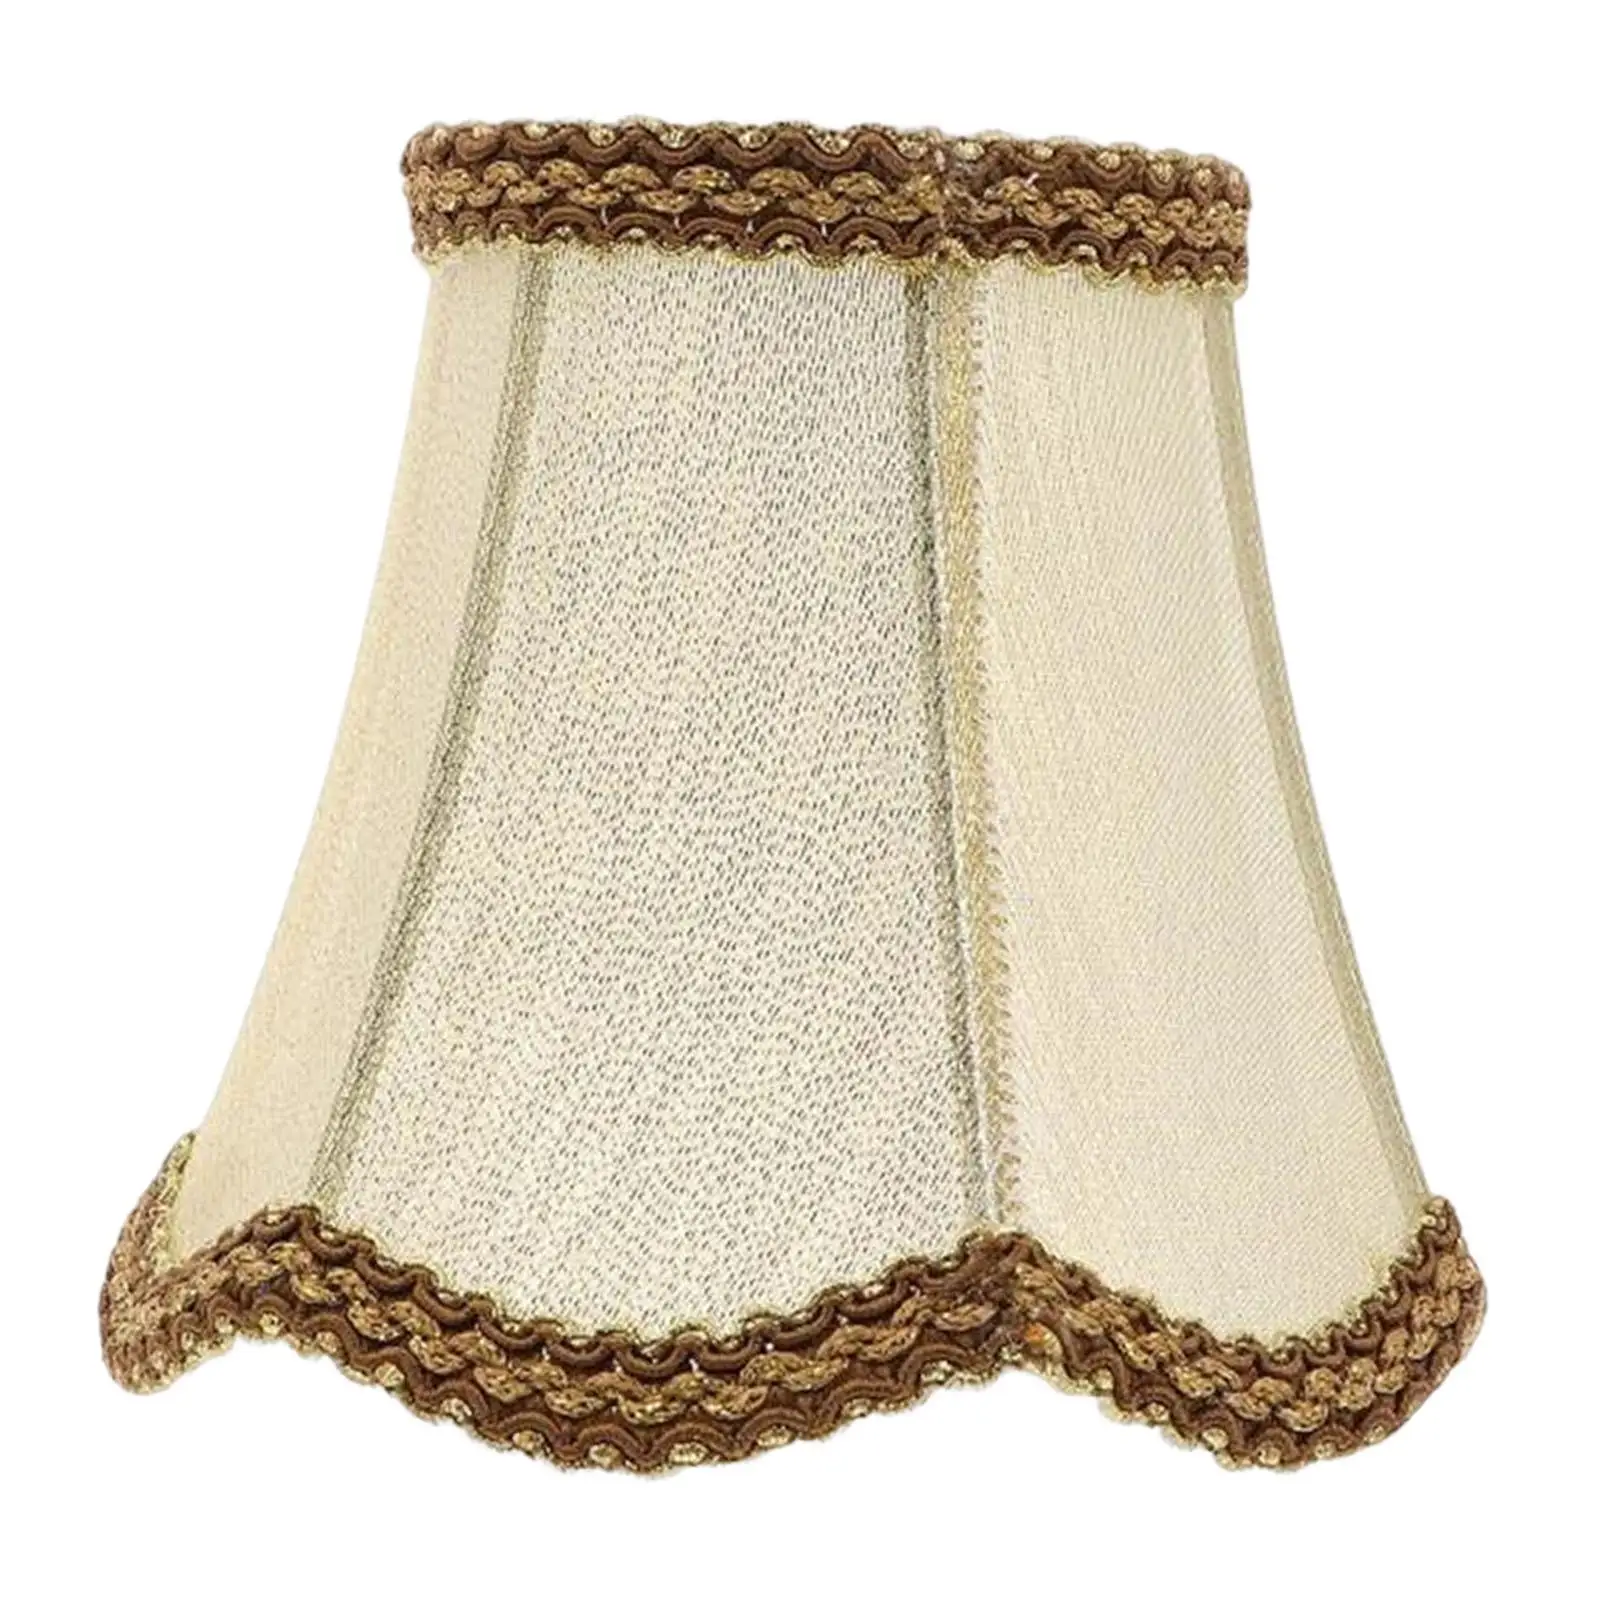 Rustic Style Lampshade Pendant Light Lamp Shade for Kitchen Restaurant